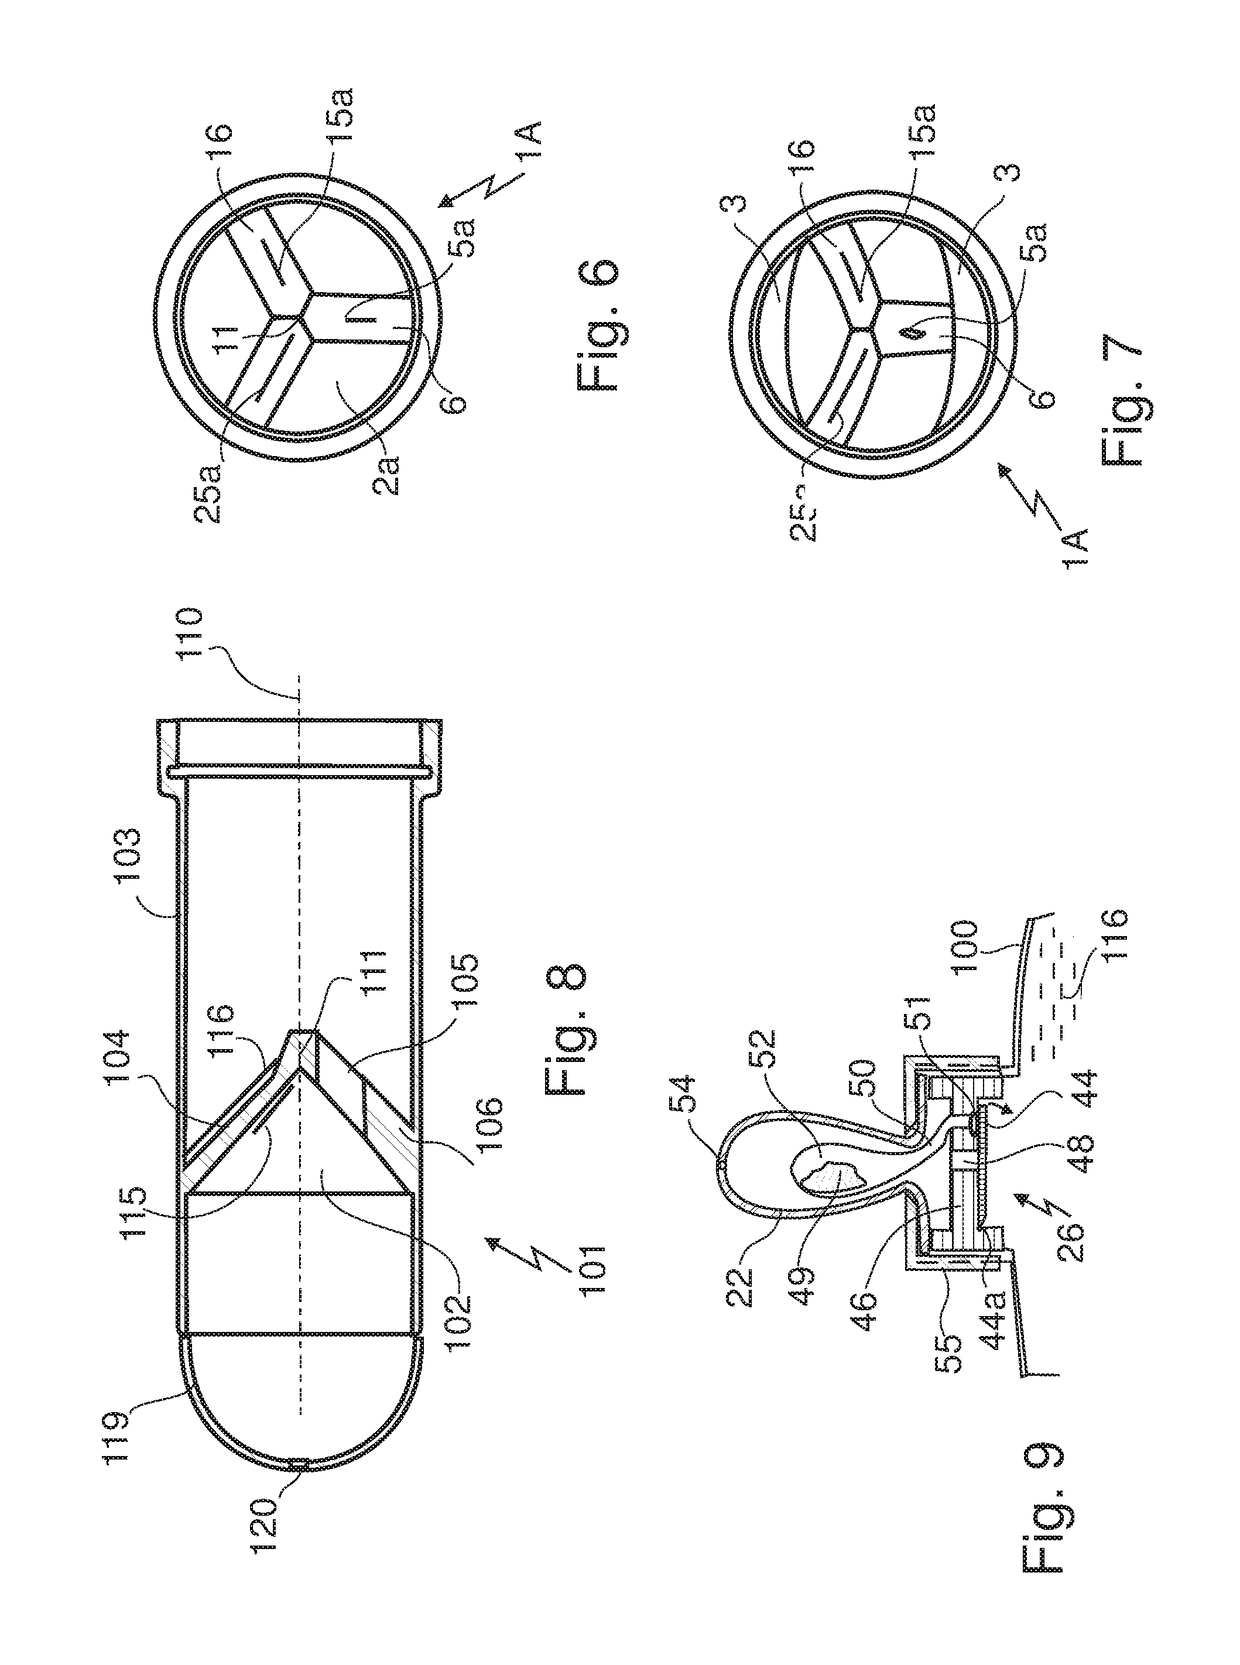 Unidirectional valve for presurized containers